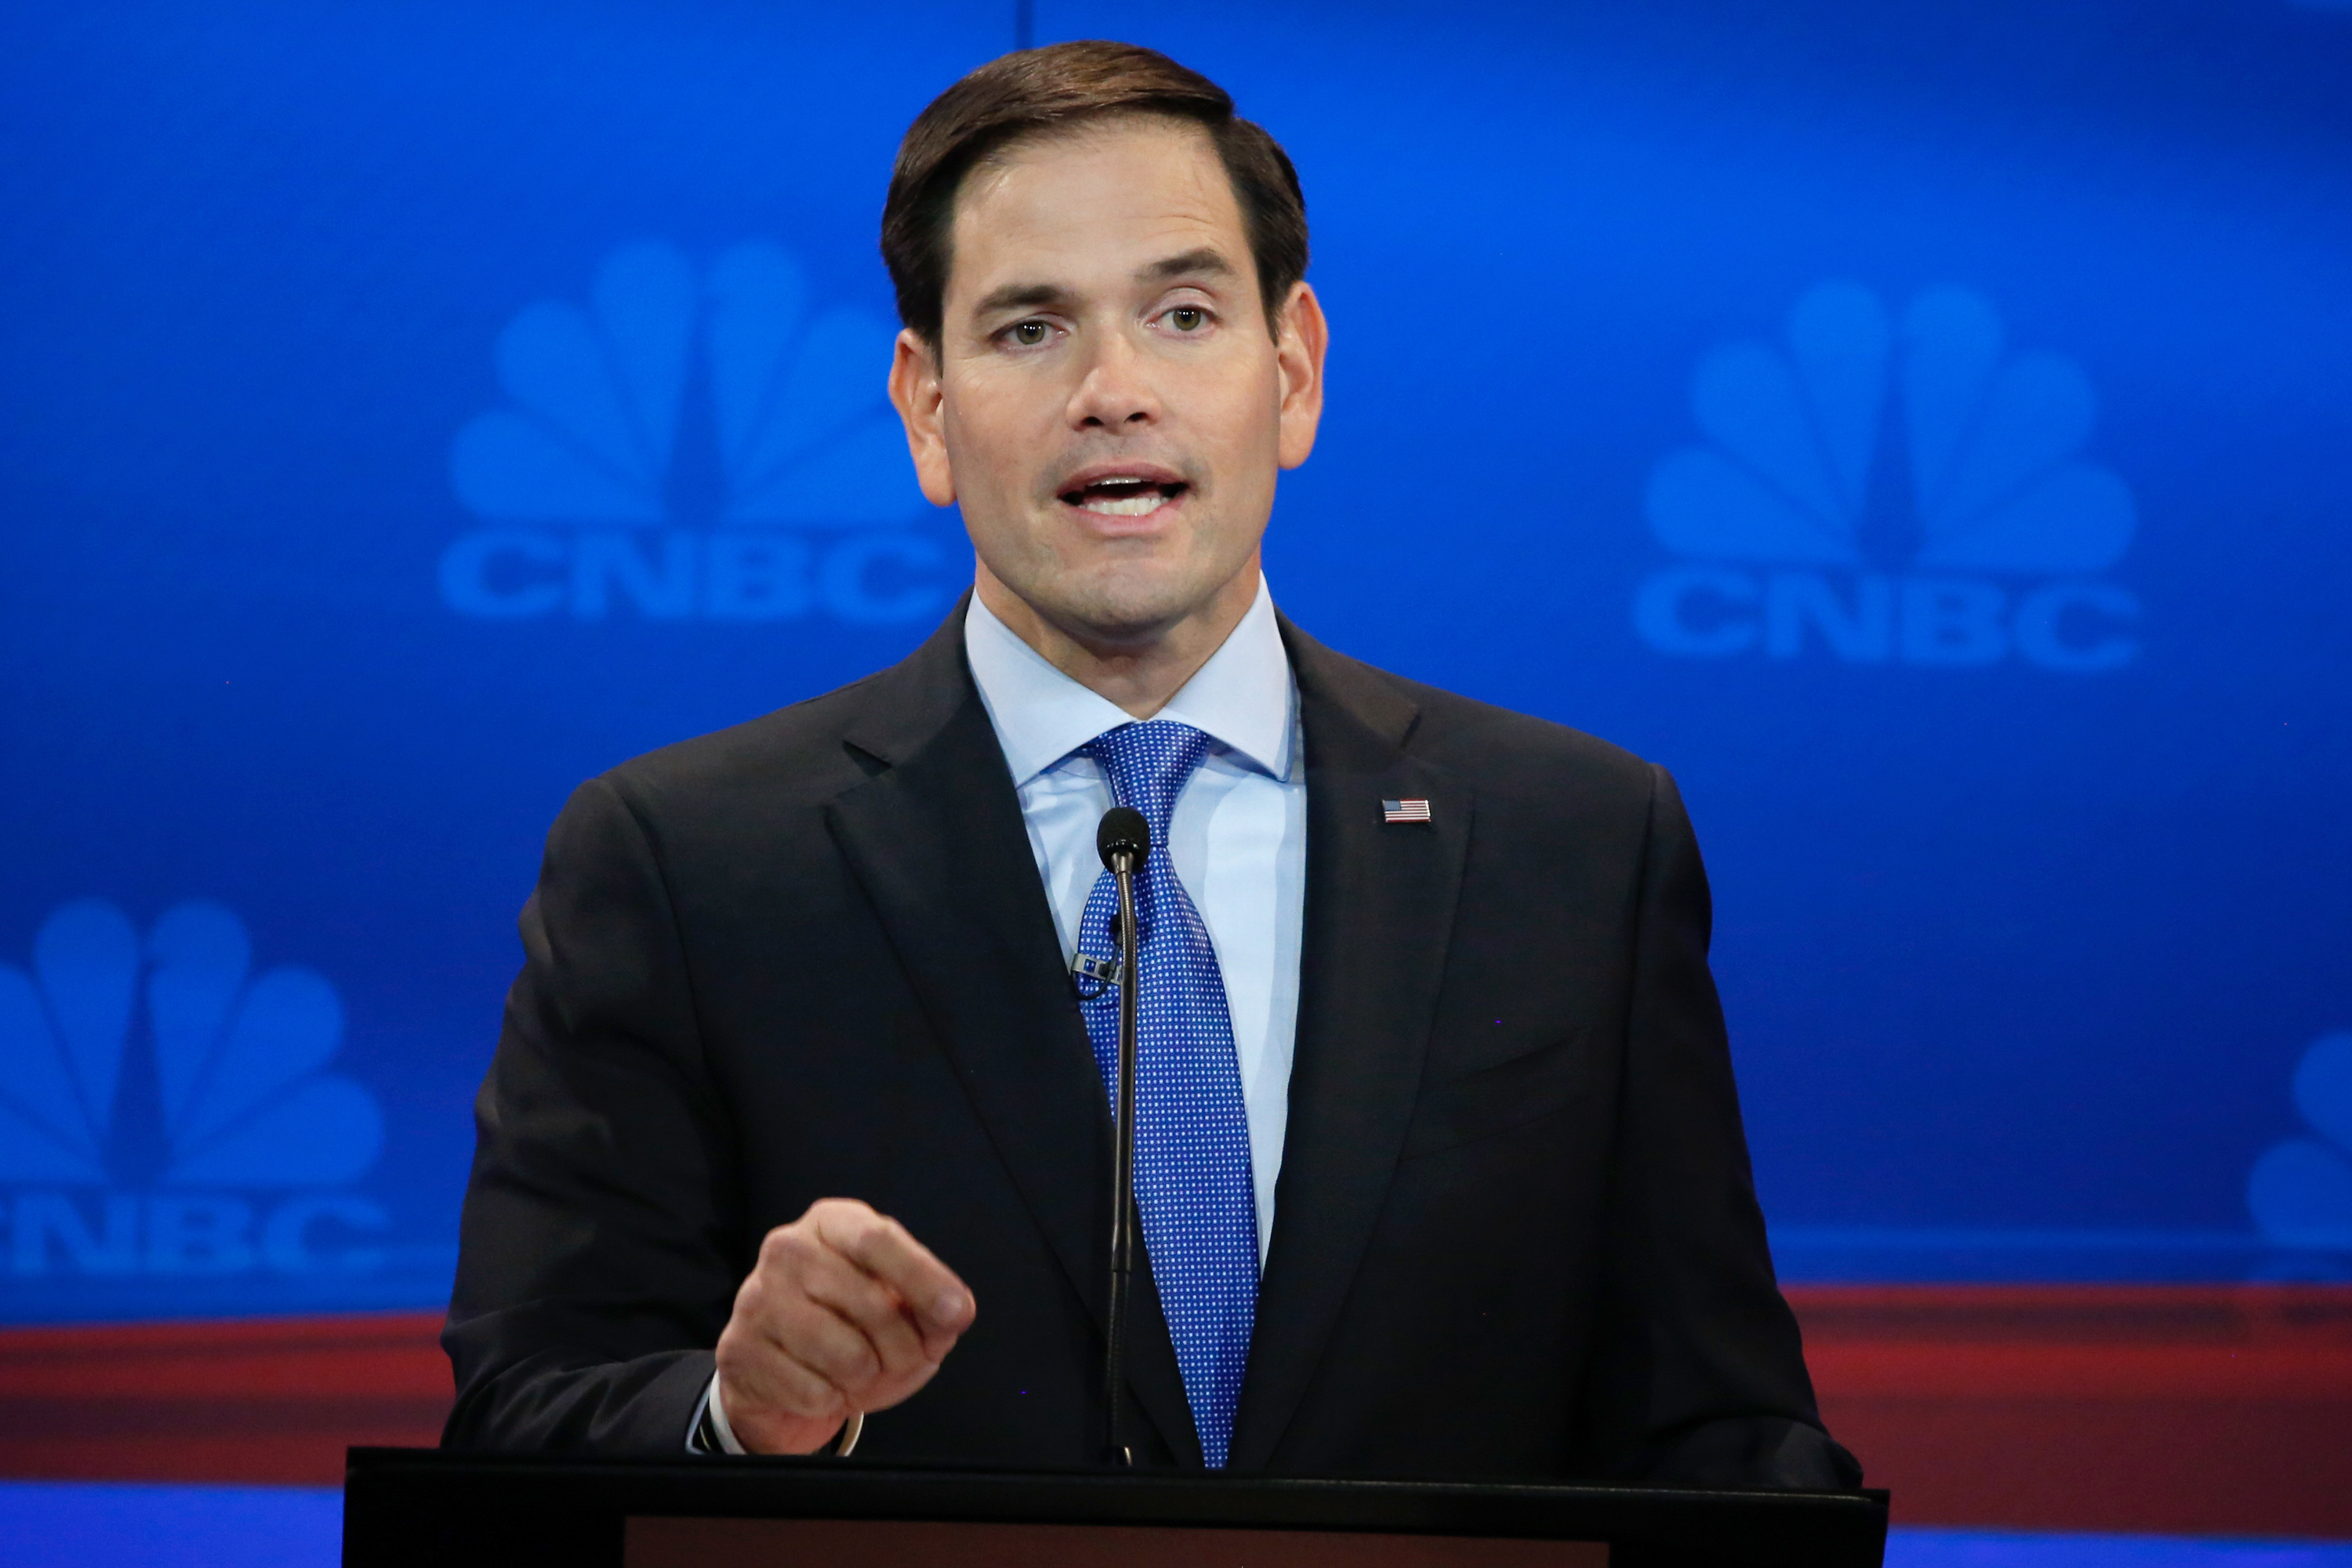 Marco Rubio participates in CNBC's "Your Money, Your Vote: The Republican Presidential Debate" at the University of Colorado Boulder in Boulder, on Oct. 28. (David A. Grogan—CNBC/NBCU Photo Bank/Getty Images)